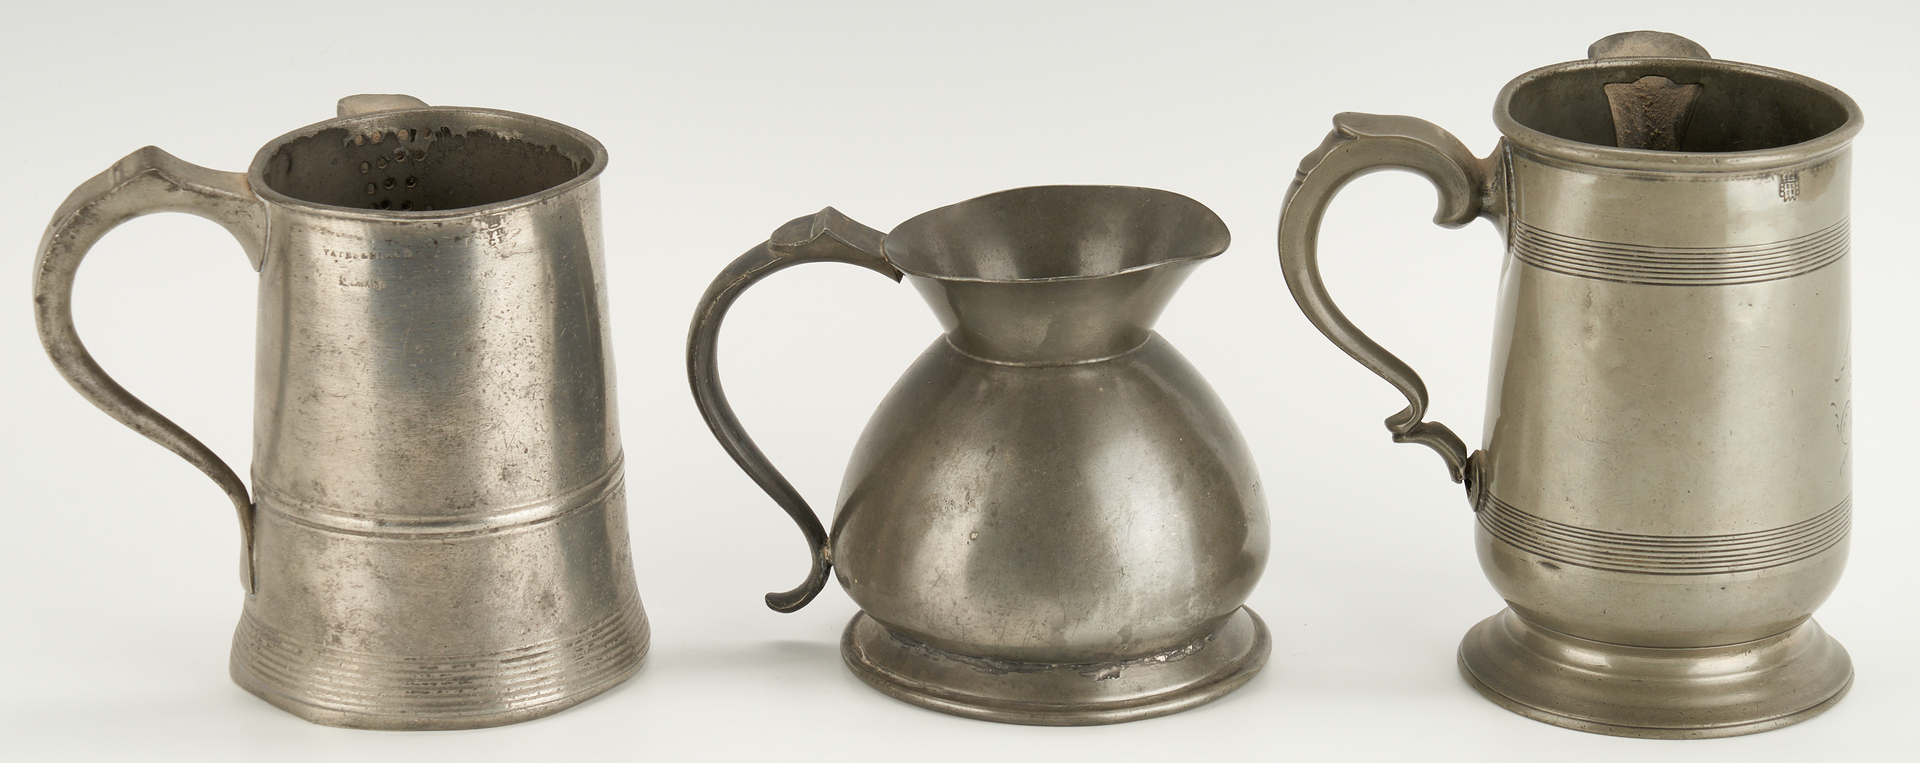 Lot 275: 11 Pcs. Pewter Flagons, Tankards, Jugs and Measures